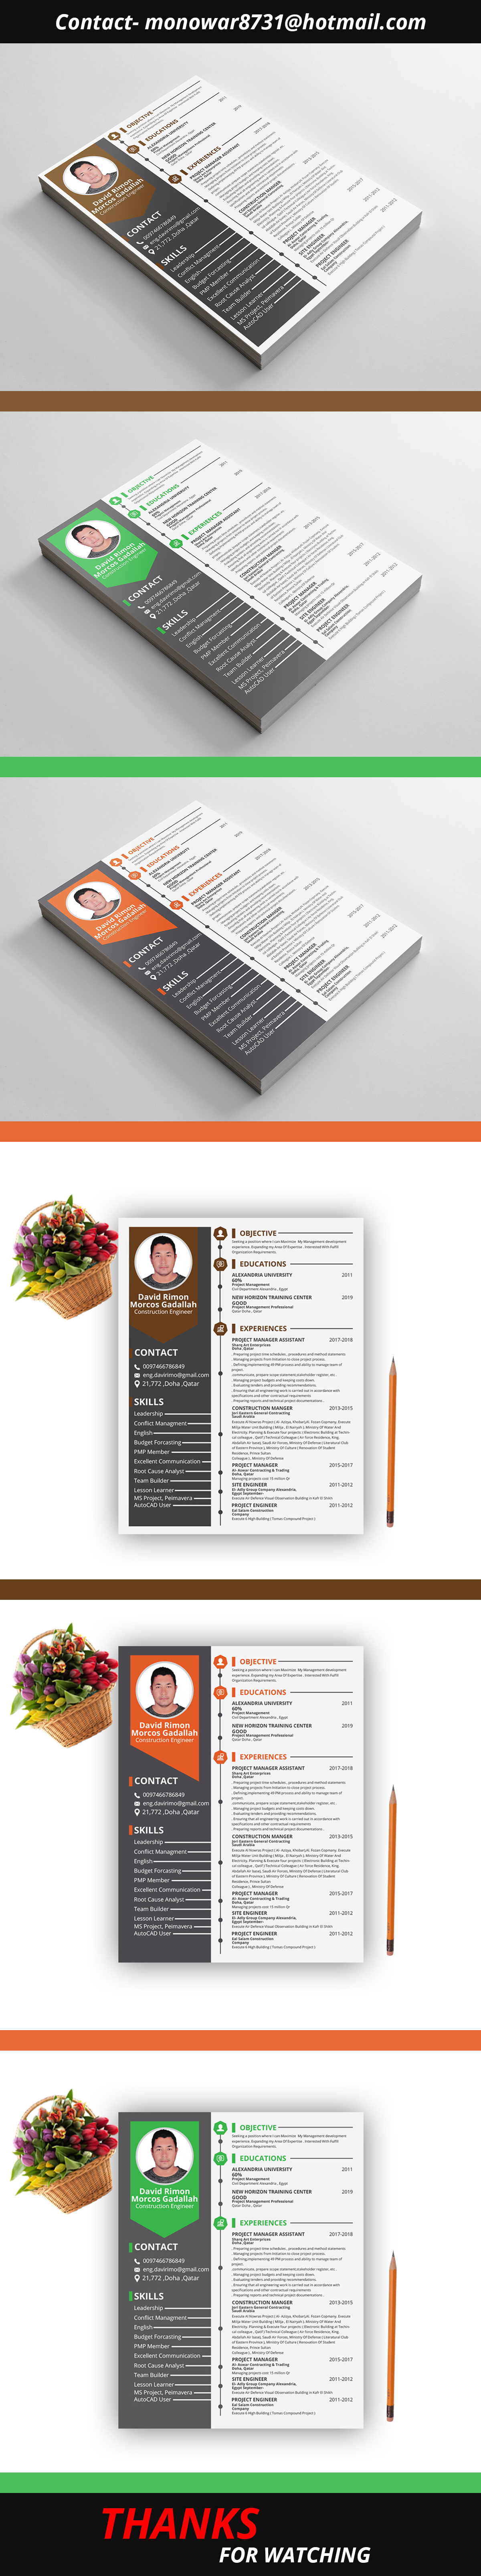 psd Resume Free Cover Letter CV template clean resume ai Free Resume psd template resume for ms